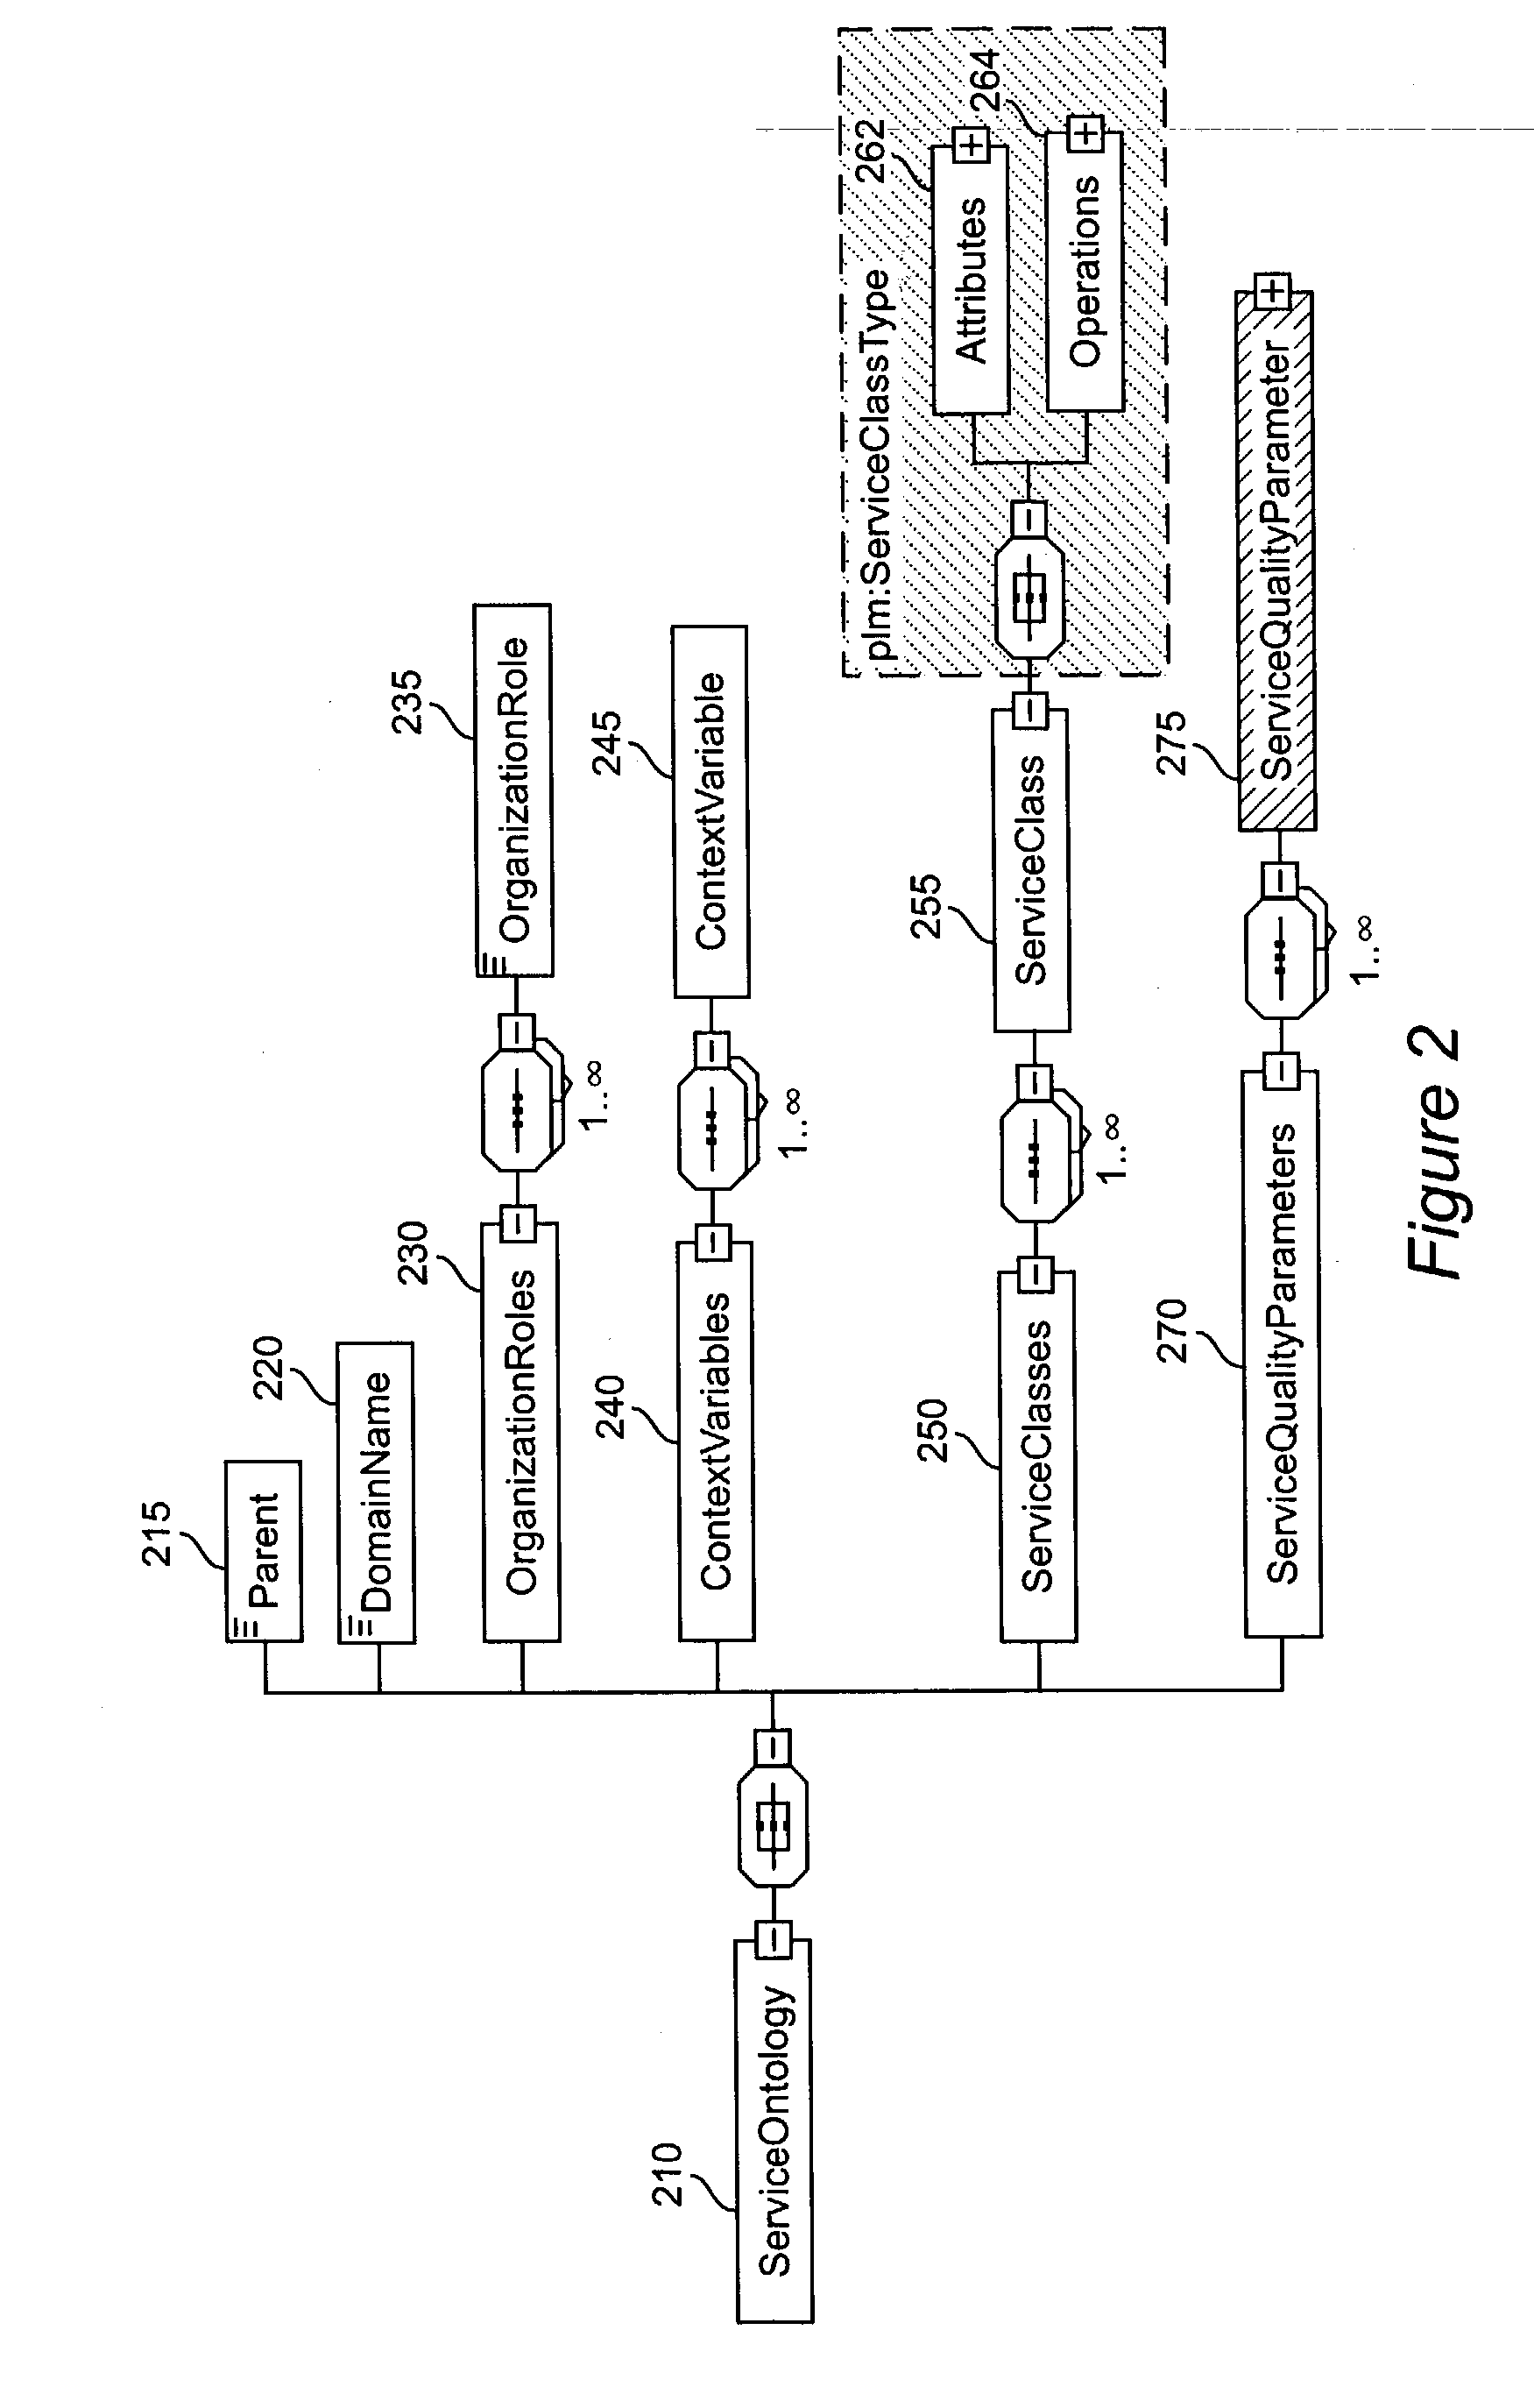 Method and apparatus for product lifecycle management in a distributed environment enabled by dynamic business process composition and execution by rule inference